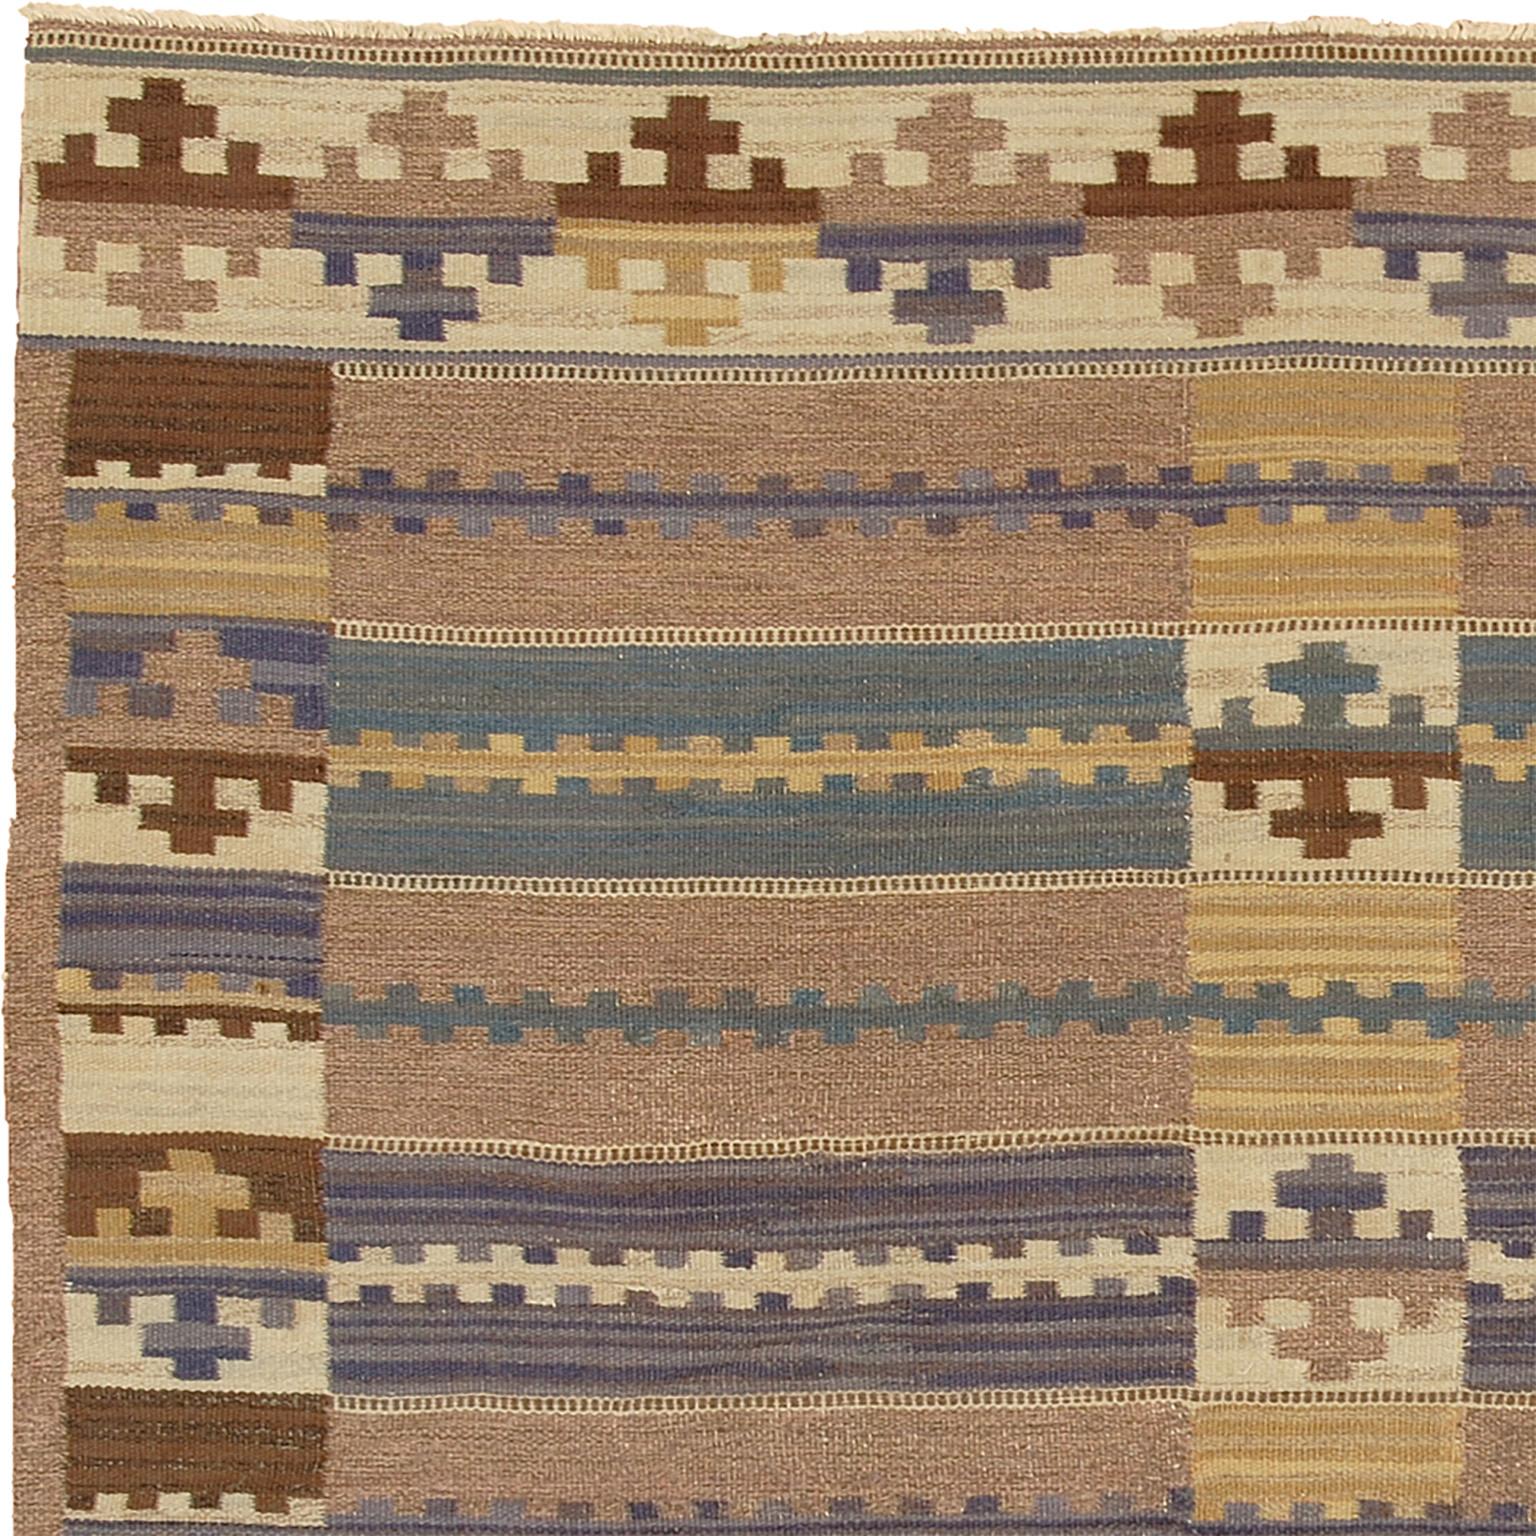 Mid-20th century Swedish flat-weave carpet
Initialed: MMF (Ma¨rta Ma°a°s-Fjetterstro¨m)
Sweden ca. 1941.